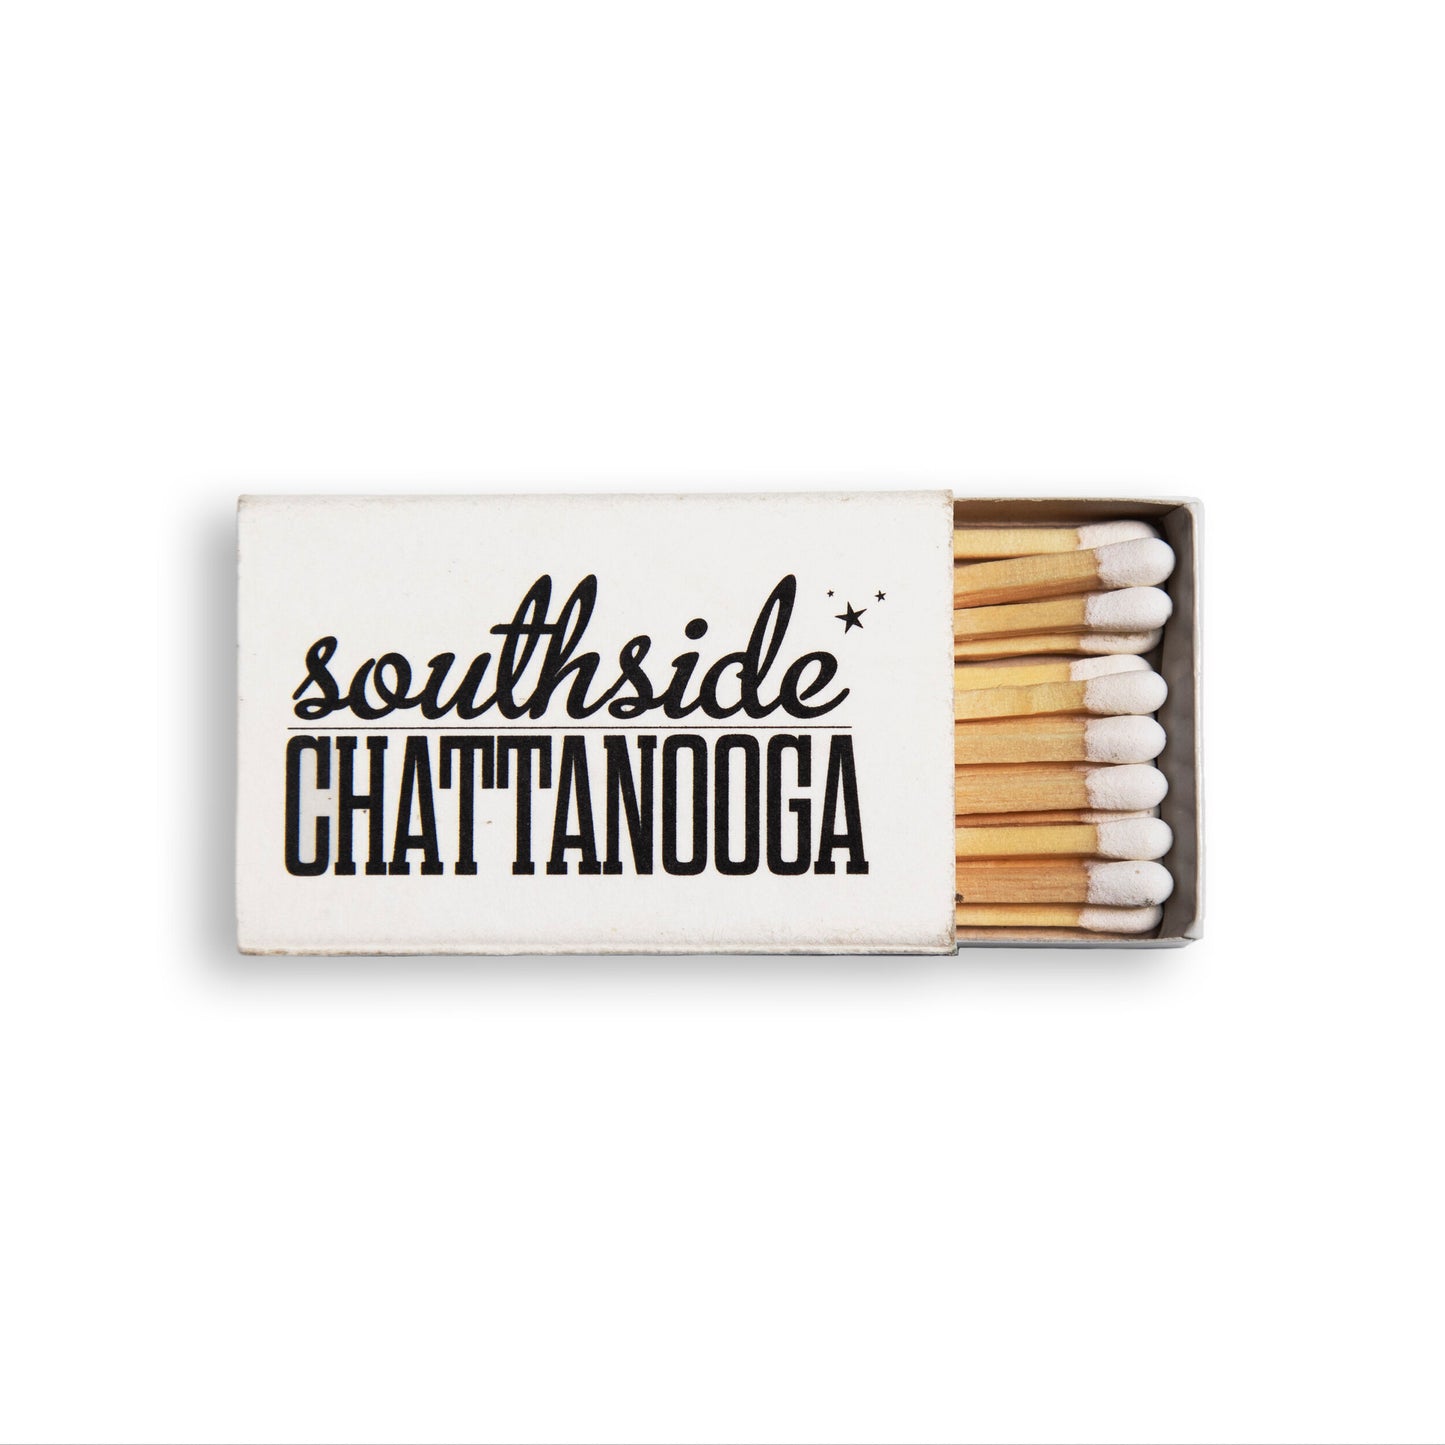 Southside Chattanooga